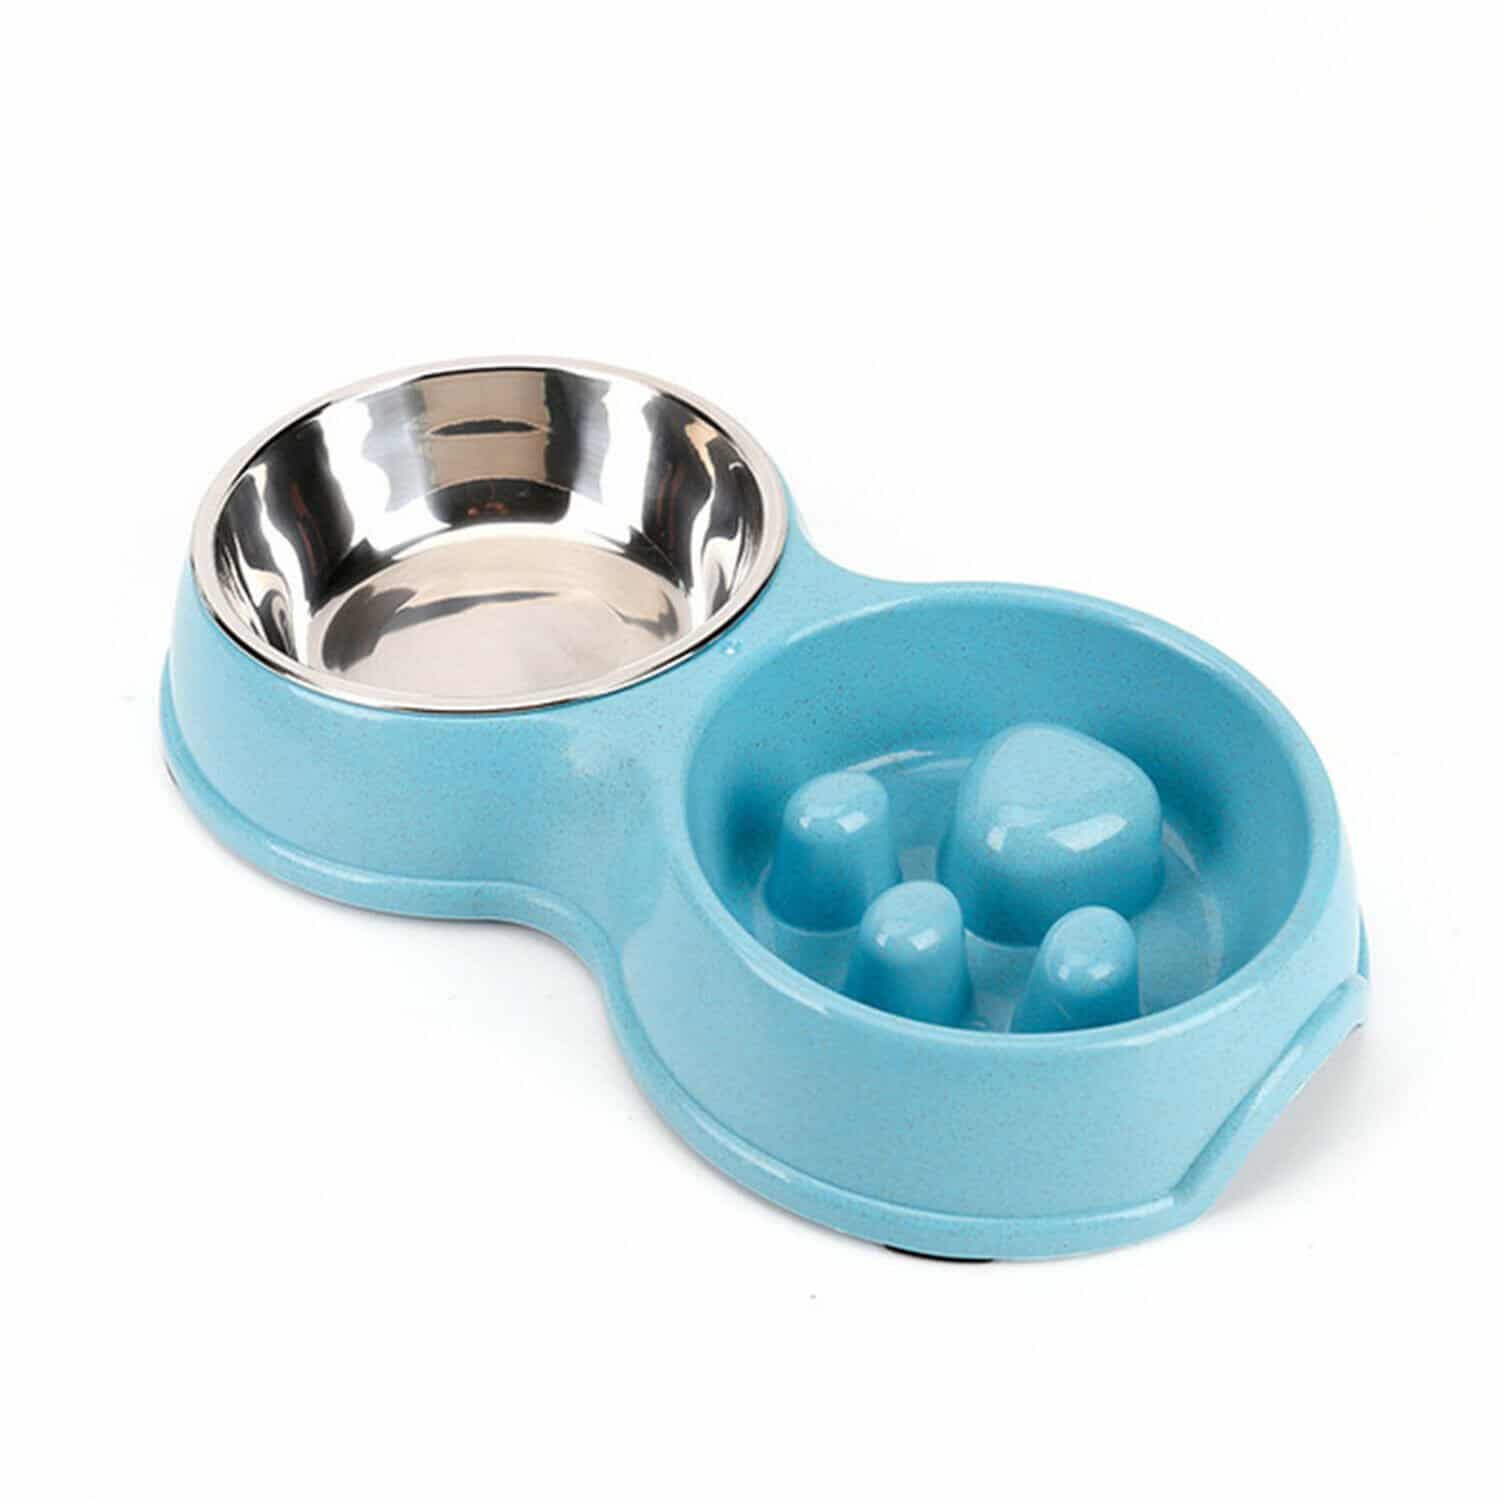 Double Food Bowl, Stainless Steel, Slow Feeder